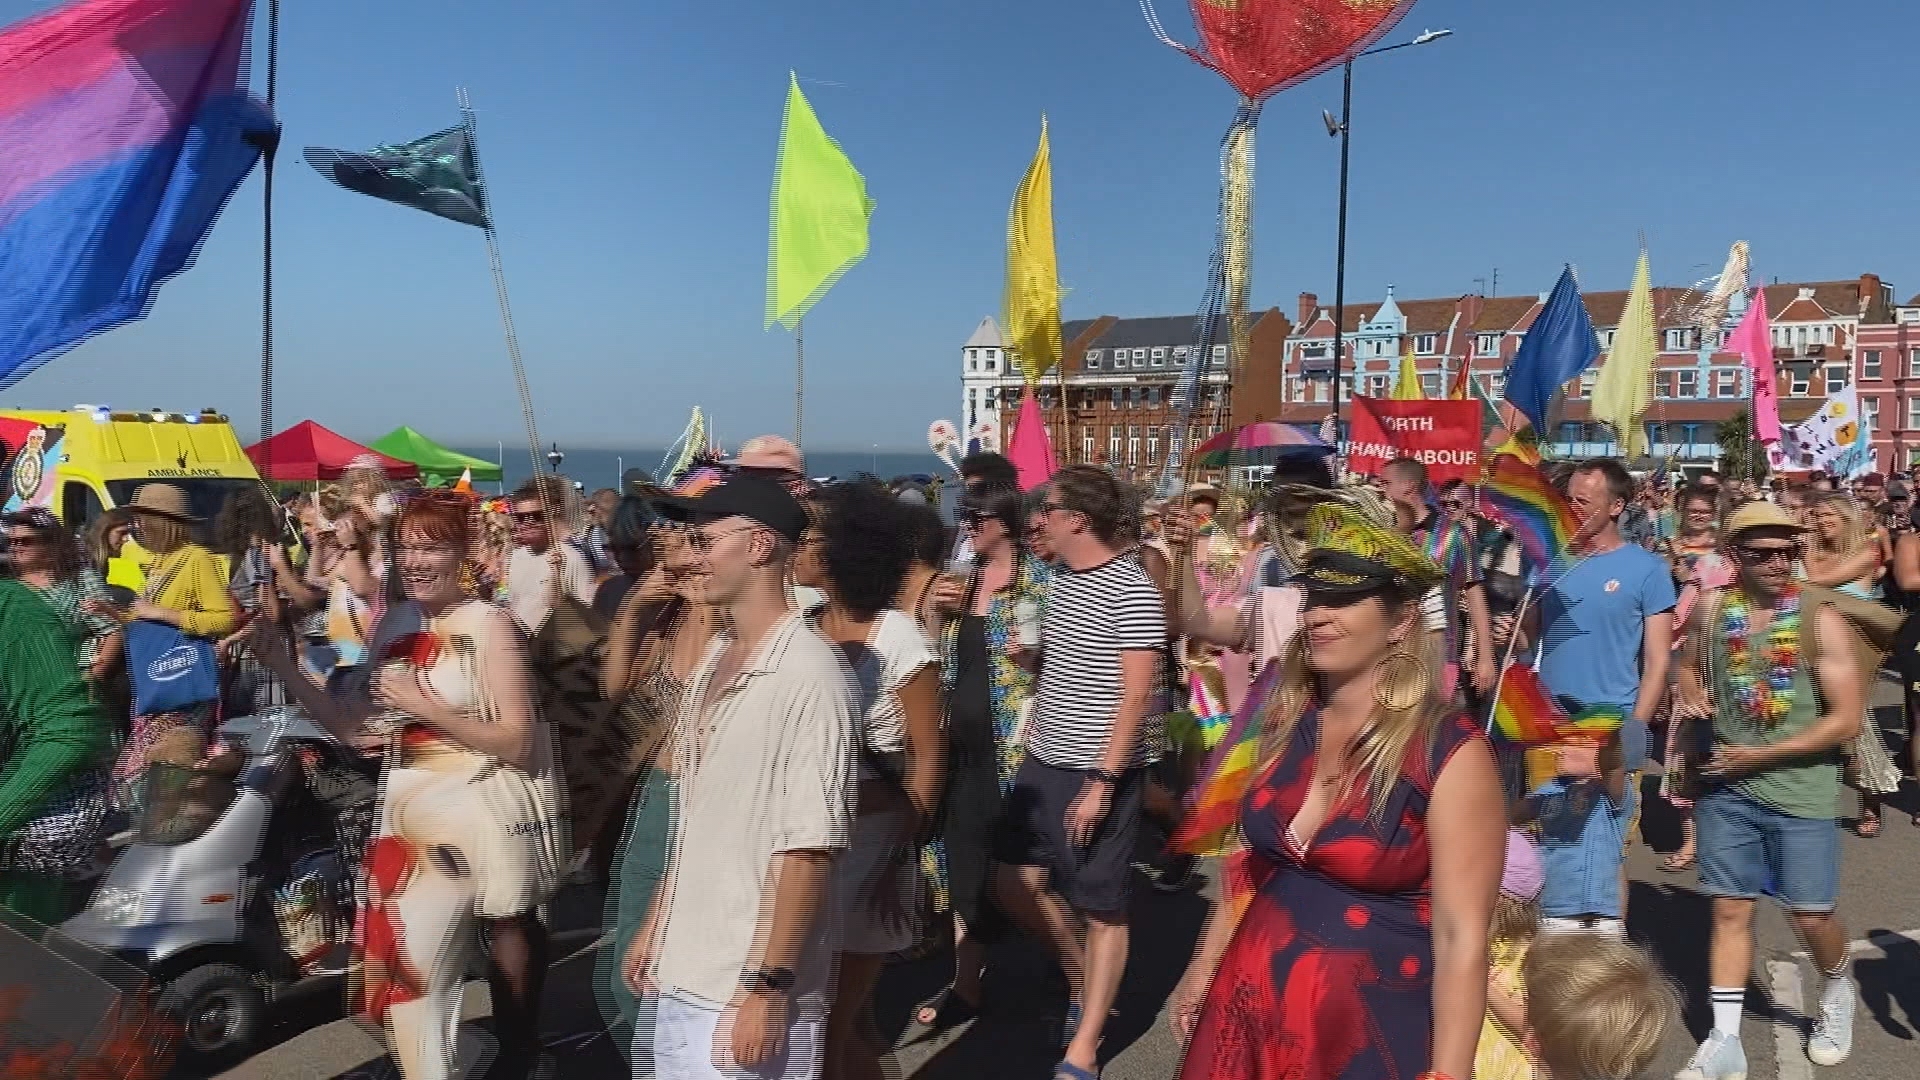 Rainbow celebrations as thousands gather for Margate Pride ITV News